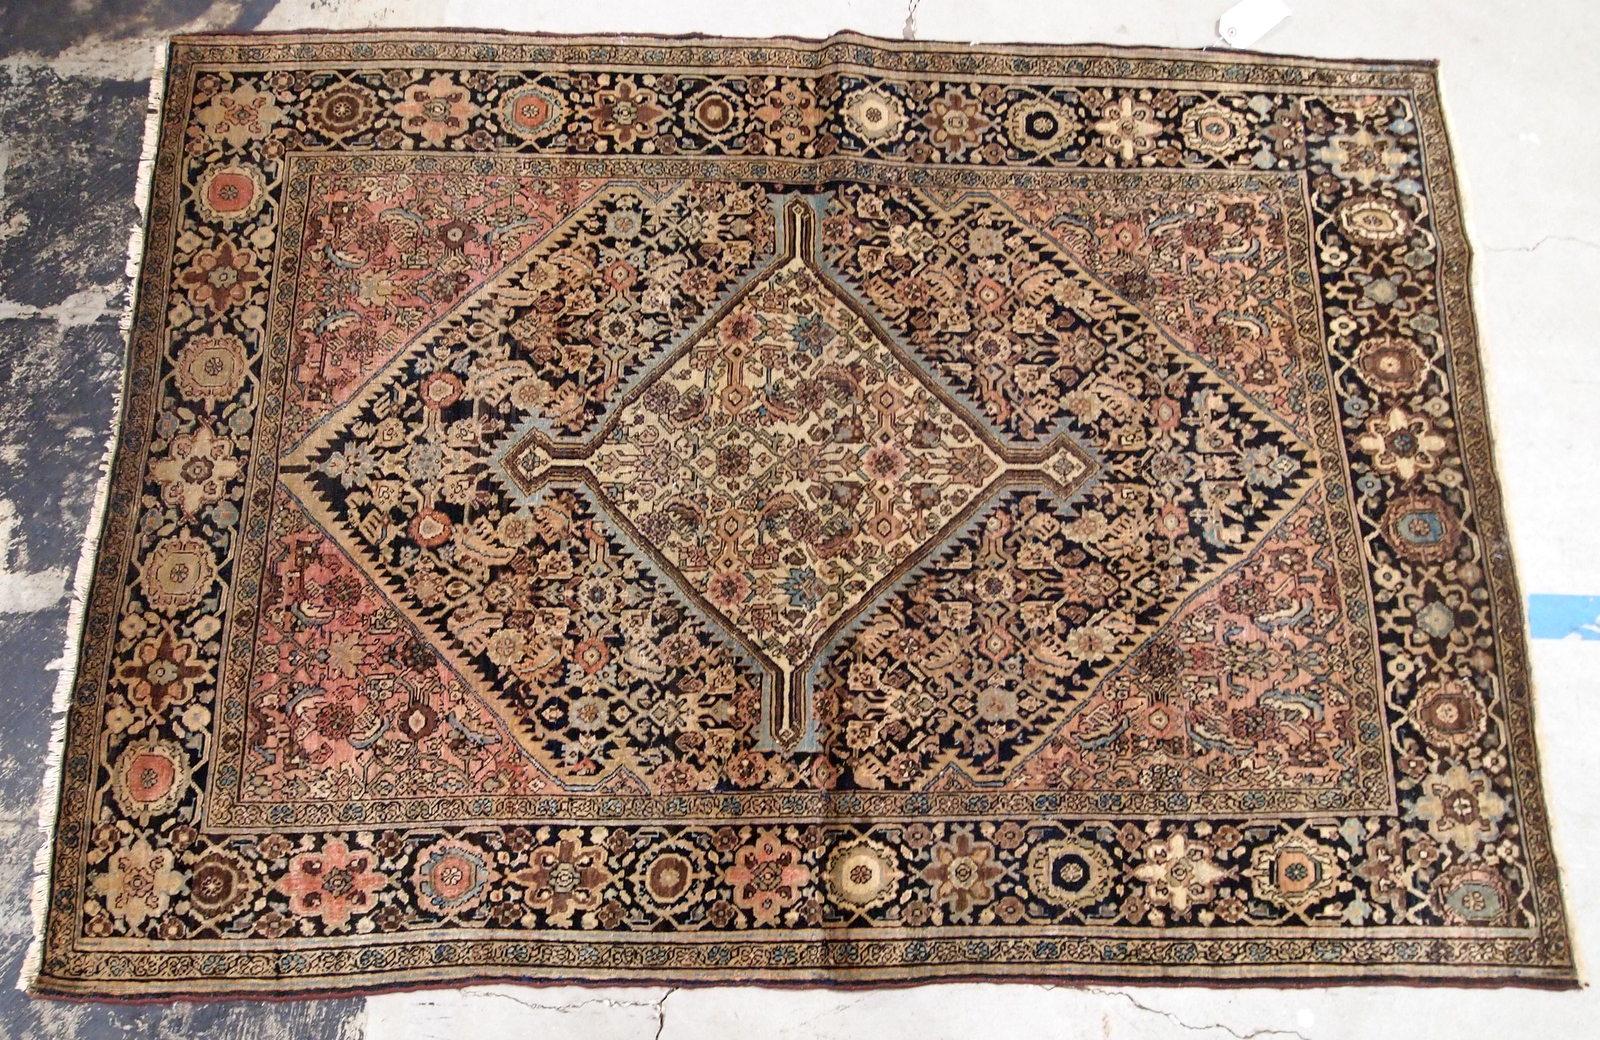 Handmade antique Sarouk Farahan rug from the end of 19th century. The rug is in original good condition made in light shades of beige and pink.

?-condition: original good,

-circa 1880s,

-size: 3.4' x 5.3' (103cm x 161cm),

-material: